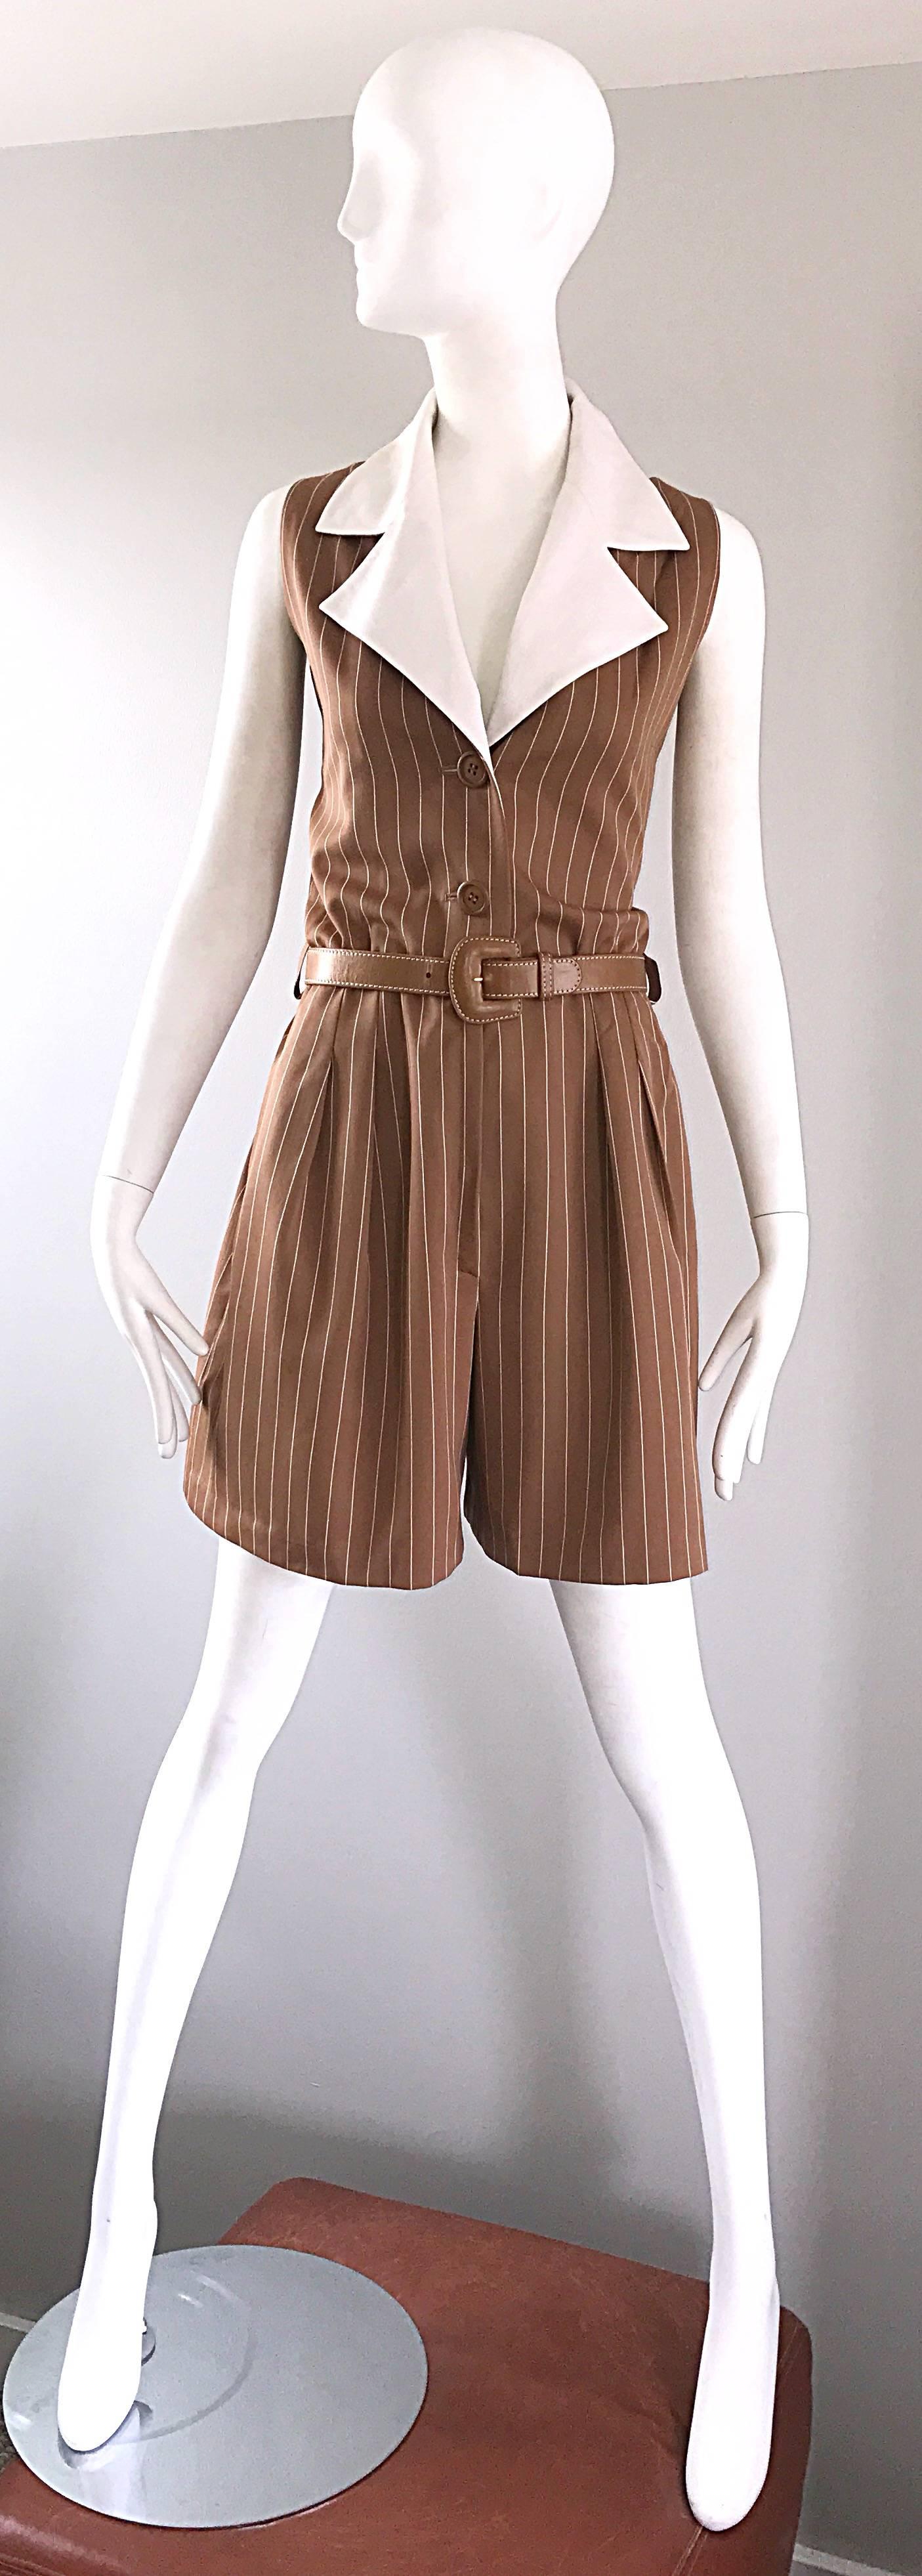 Rare vintage early 90s GIVENCHY COUTURE numbered one piece collared romper playsuit! Light brown color with vertical white pinstripes throughout. Matching oversized white lapels and collar. Buttons up the bodice, with hook-and-eye closure and zipper